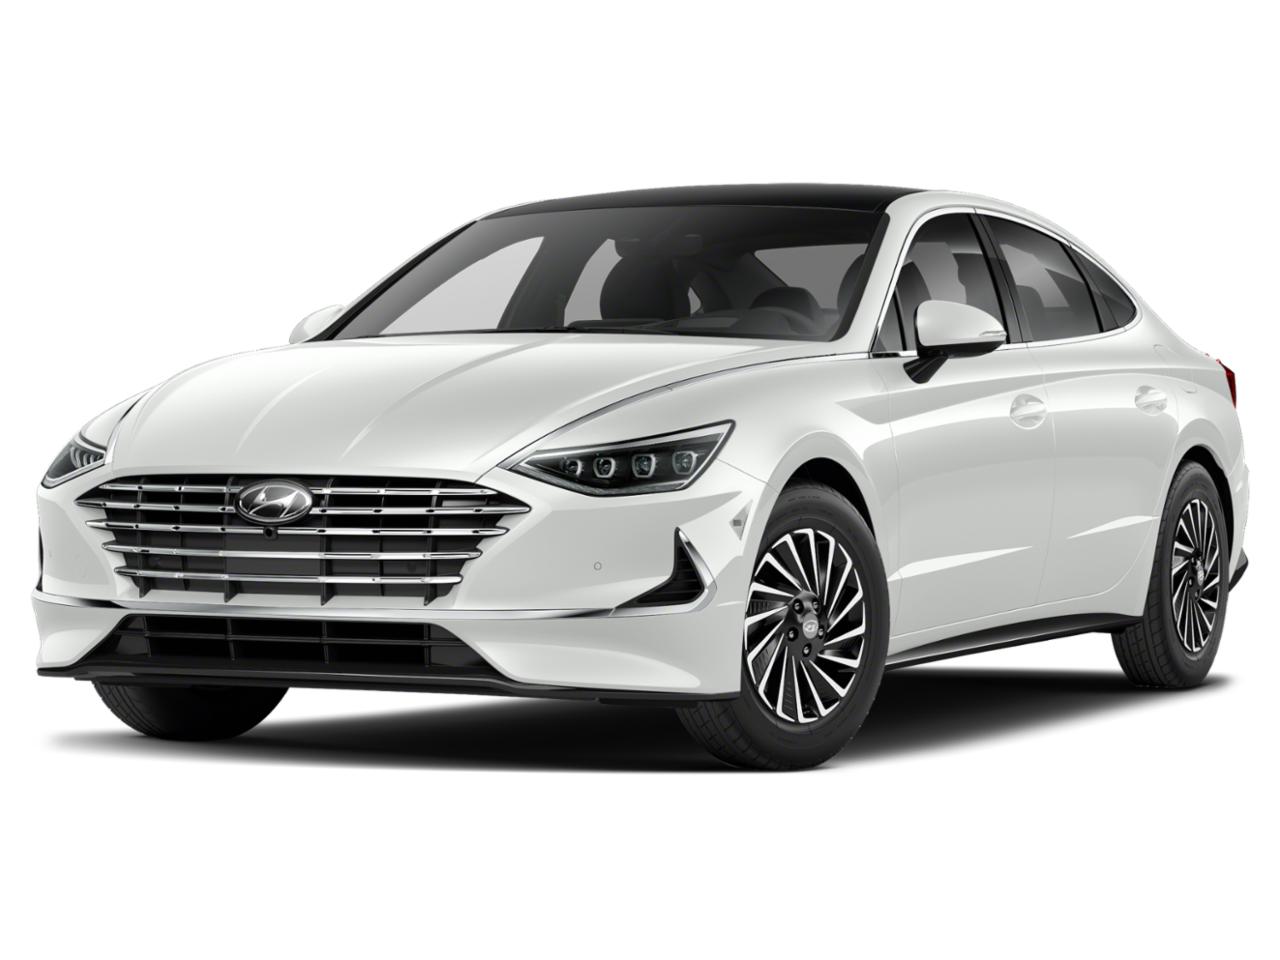 2023 Hyundai SONATA Hybrid in Limited 2.0L and White for Sale in